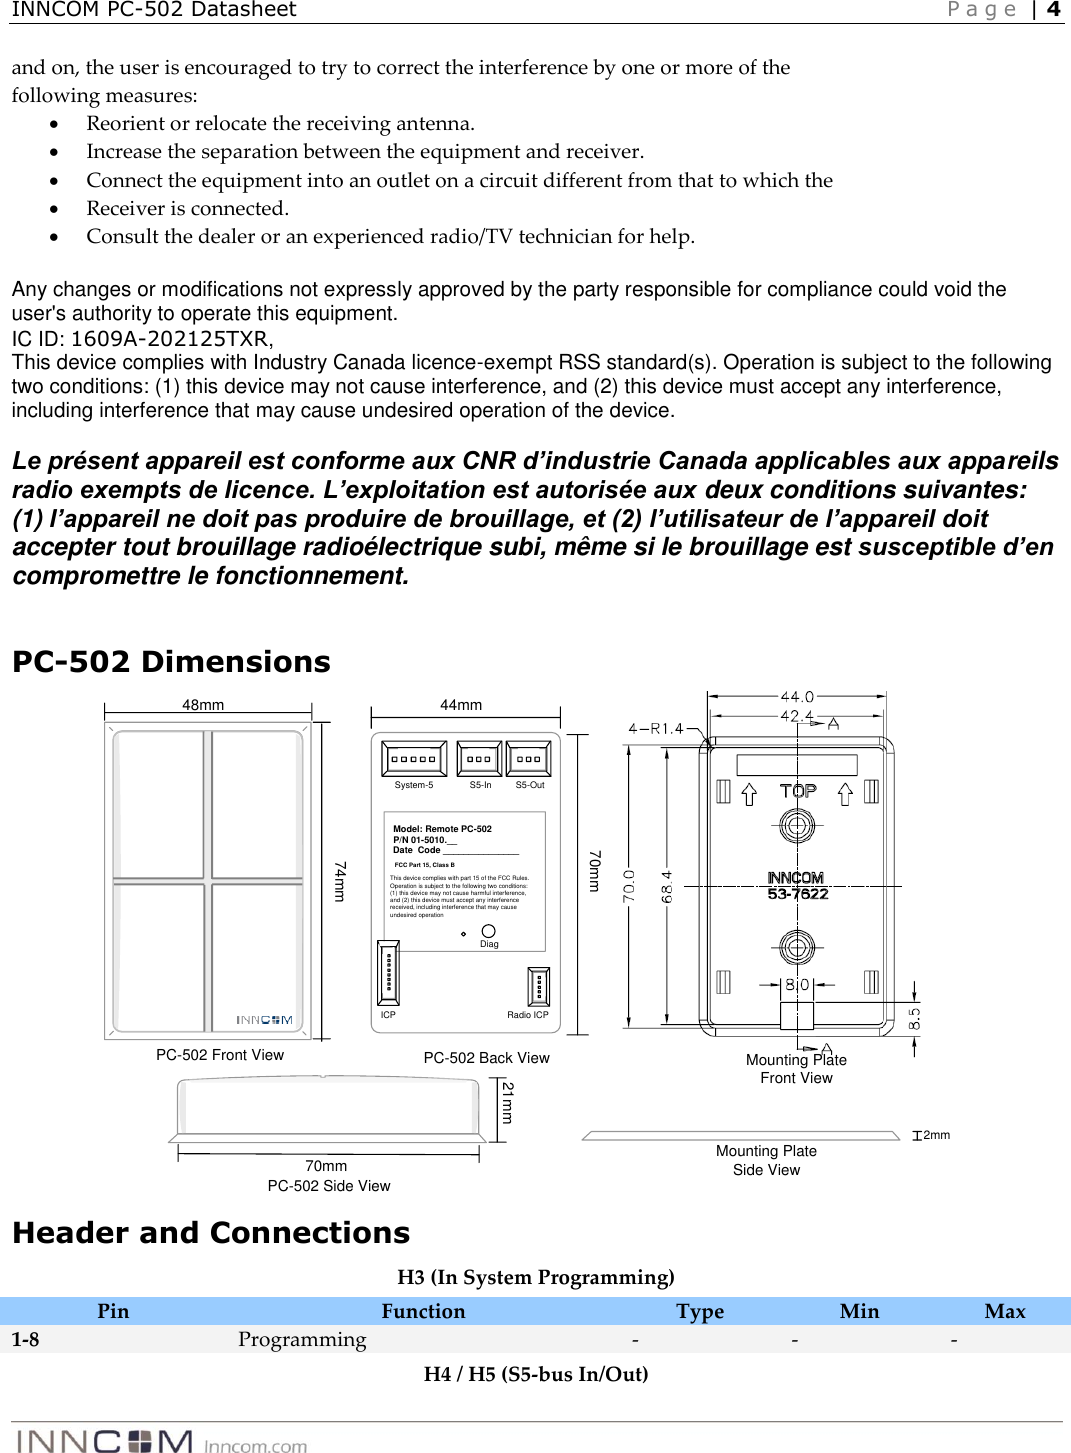 INNCOM PC-502 Datasheet    P a g e  | 4   and on, the user is encouraged to try to correct the interference by one or more of the following measures:  Reorient or relocate the receiving antenna.  Increase the separation between the equipment and receiver.  Connect the equipment into an outlet on a circuit different from that to which the  Receiver is connected.  Consult the dealer or an experienced radio/TV technician for help.  Any changes or modifications not expressly approved by the party responsible for compliance could void the user&apos;s authority to operate this equipment. IC ID: 1609A-202125TXR,  This device complies with Industry Canada licence-exempt RSS standard(s). Operation is subject to the following two conditions: (1) this device may not cause interference, and (2) this device must accept any interference, including interference that may cause undesired operation of the device.  Le présent appareil est conforme aux CNR d’industrie Canada applicables aux appareils radio exempts de licence. L’exploitation est autorisée aux deux conditions suivantes: (1) l’appareil ne doit pas produire de brouillage, et (2) l’utilisateur de l’appareil doit accepter tout brouillage radioélectrique subi, même si le brouillage est susceptible d’en compromettre le fonctionnement.  PC-502 Dimensions System-5 S5-In S5-OutRadio ICPICPDiagModel: Remote PC-502P/N 01-5010.__Date  Code _______________ This device complies with part 15 of the FCC Rules. Operation is subject to the following two conditions: (1) this device may not cause harmful interference, and (2) this device must accept any interference received, including interference that may cause undesired operationFCC Part 15, Class BPC-502 Back View44mm70mm74mmPC-502 Front View48mm21mm70mmPC-502 Side View2mmMounting Plate Side ViewMounting Plate Front View Header and Connections H3 (In System Programming) Pin Function Type Min Max 1-8 Programming  - - - H4 / H5 (S5-bus In/Out) 